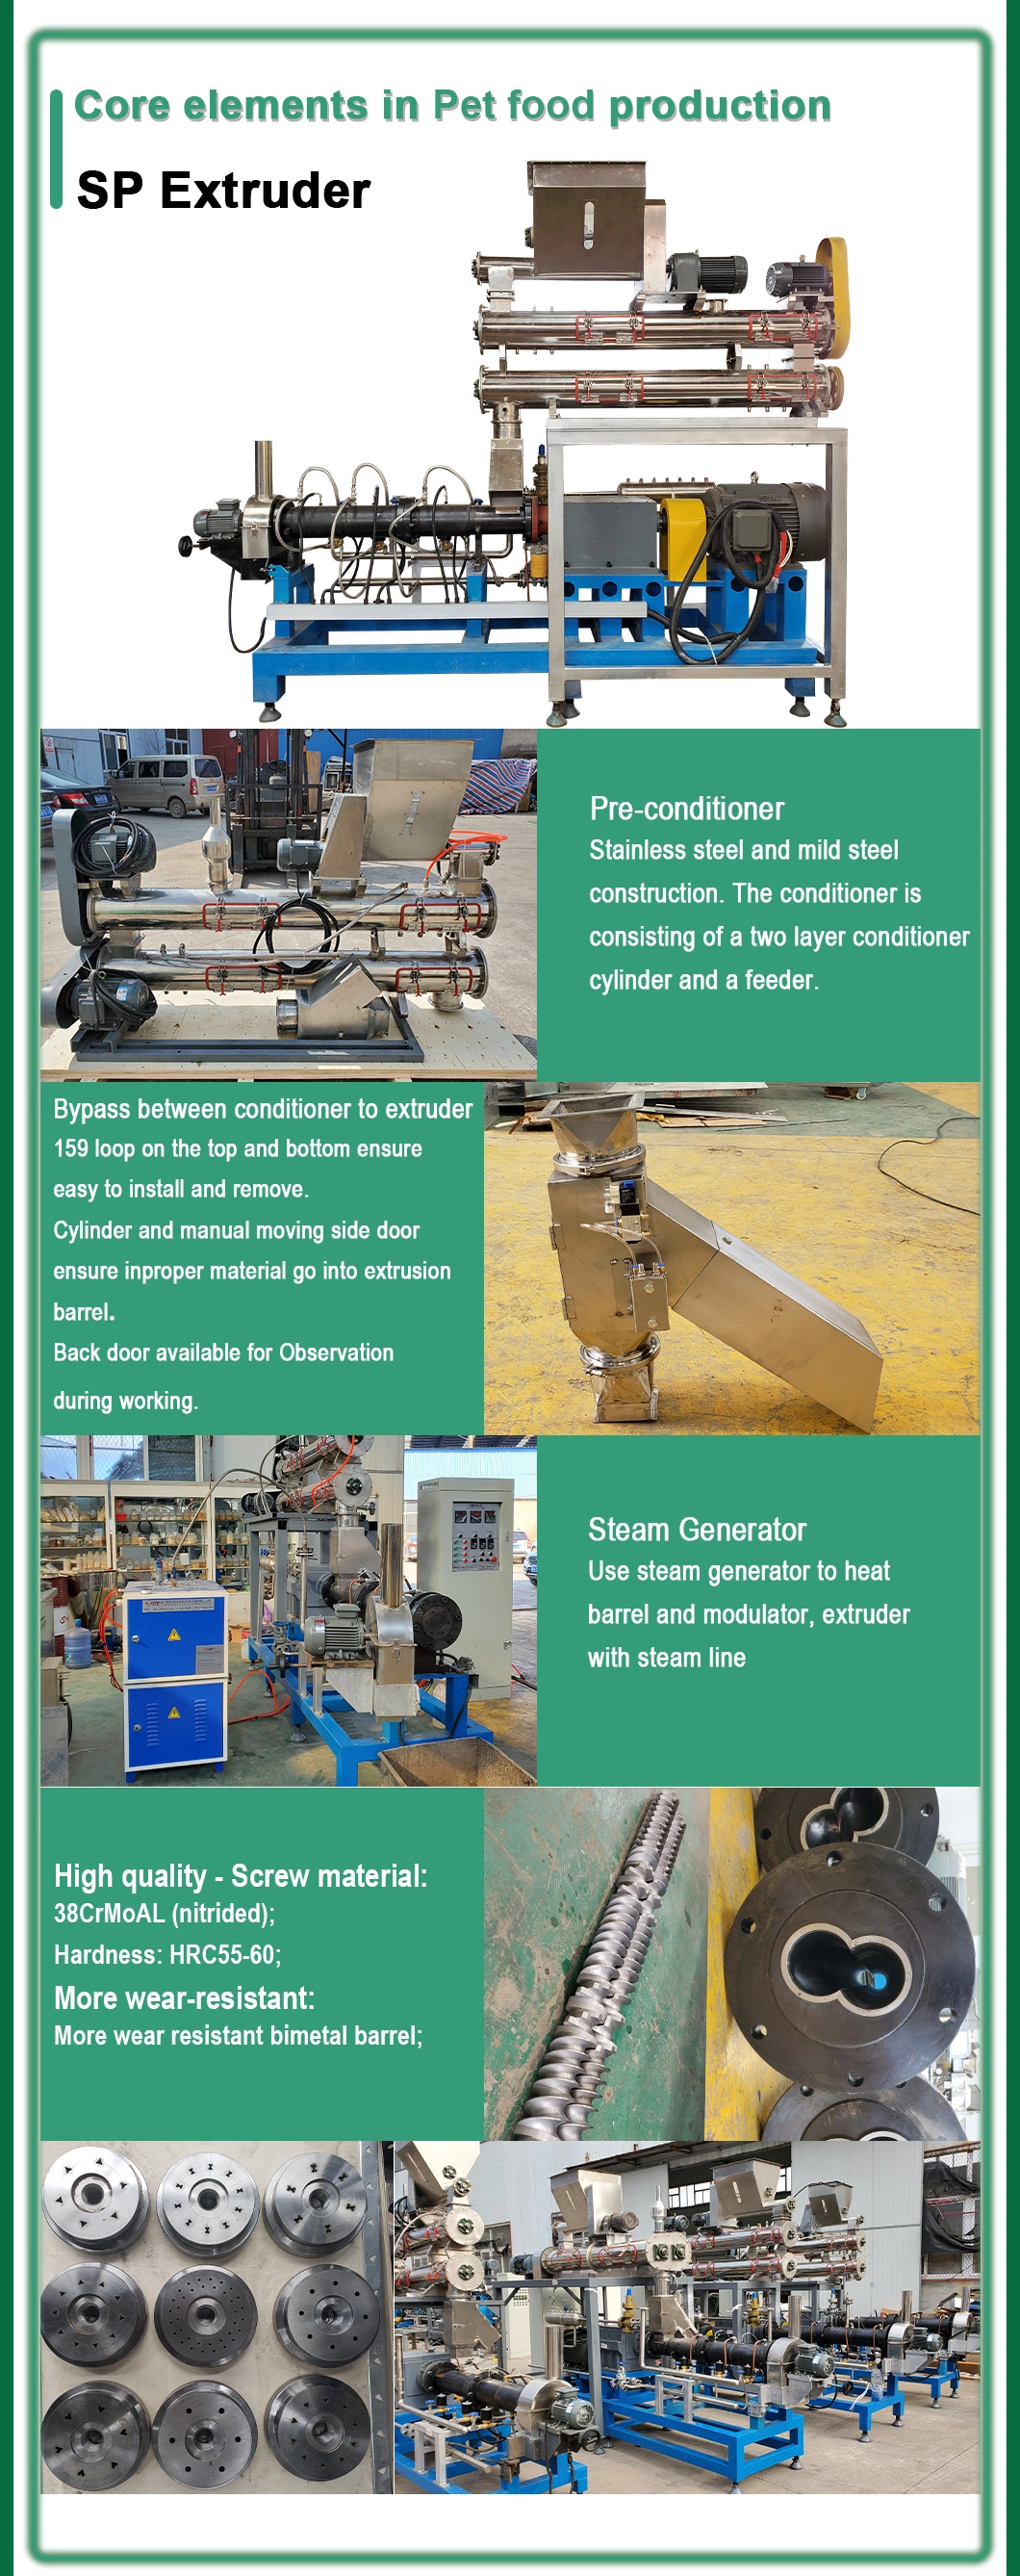 Greatly Admired Tse Extruded Dog Food Making Machine + Used Pet Food Extruder for Sale + Canned Wet Pet Food Production Line